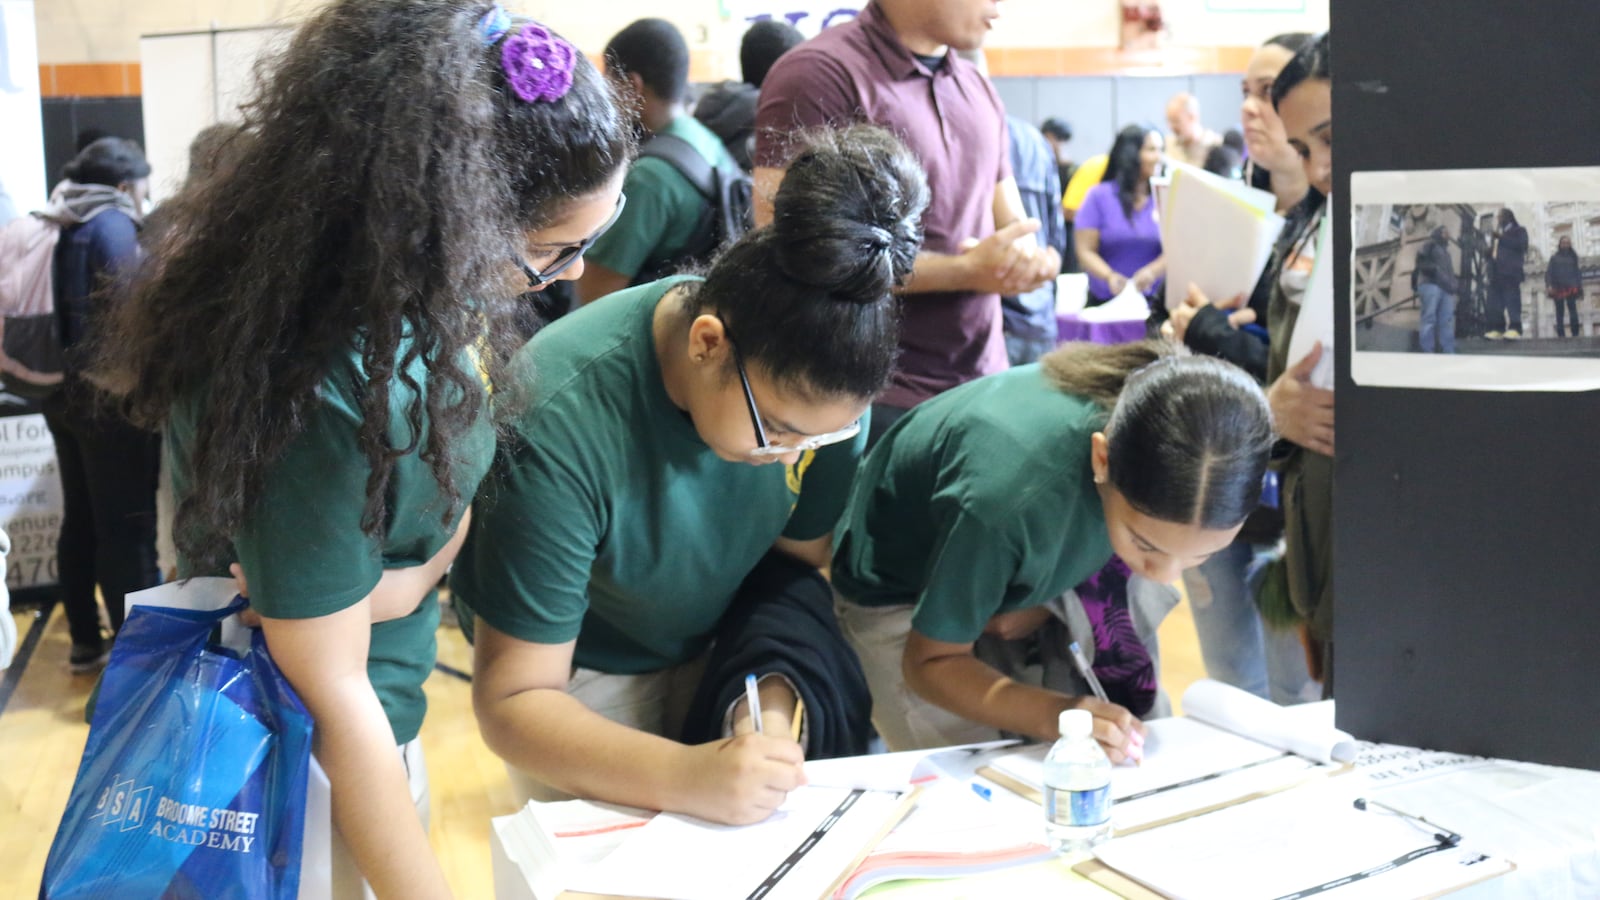 Middle school students write their names down at a high school fair in Brooklyn in 2016.